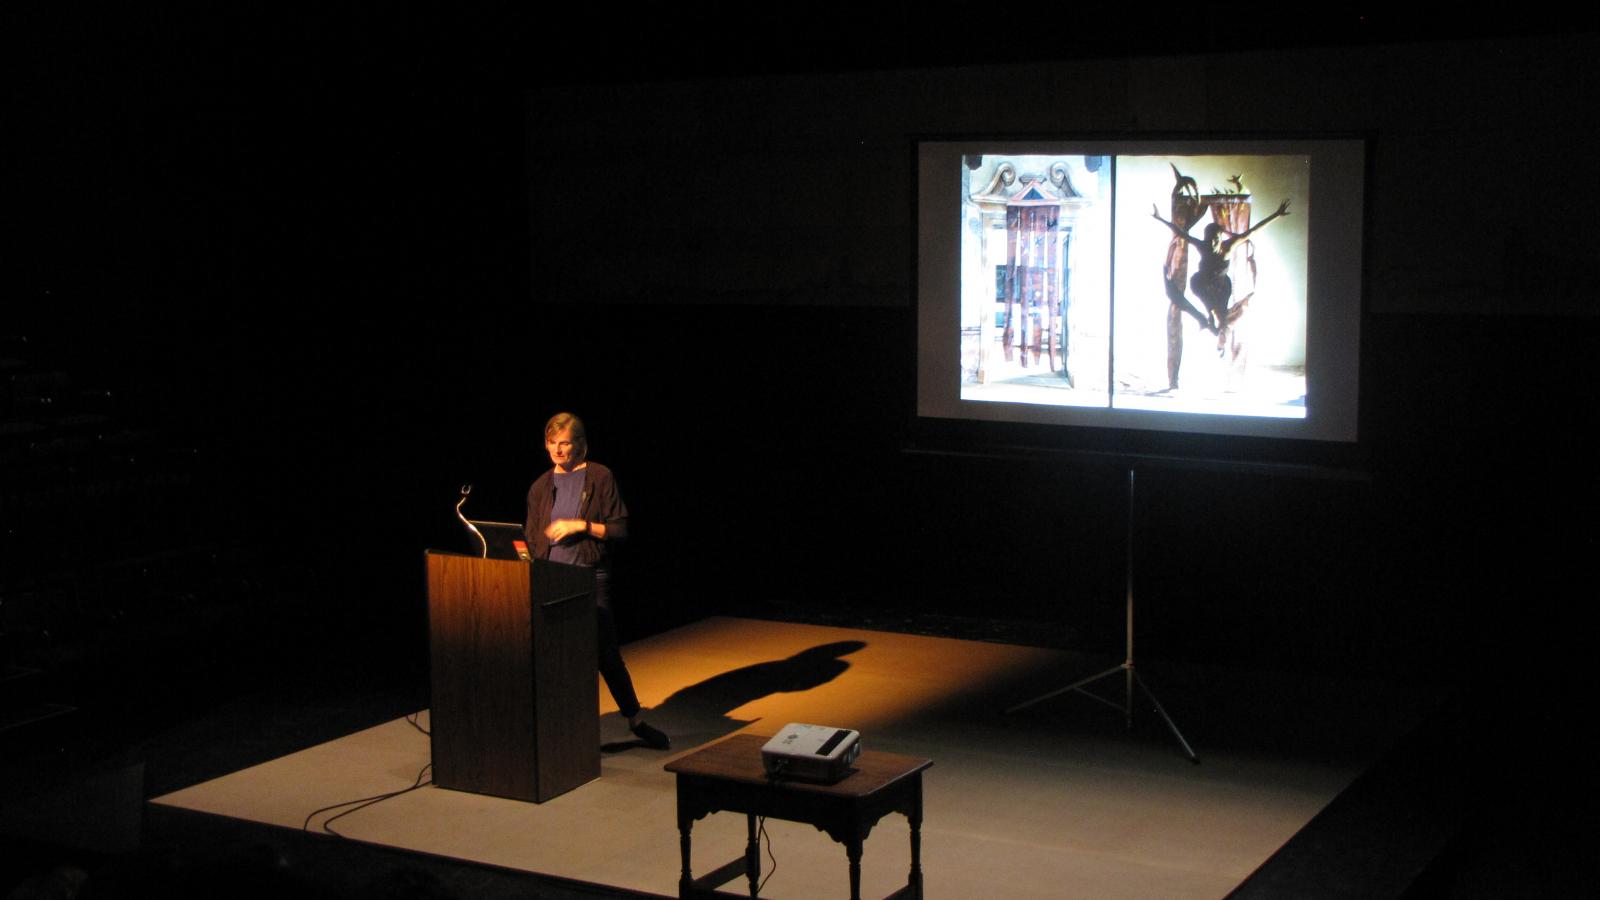 Simona Rybáková delivering the Lawrence and Lee Lecture